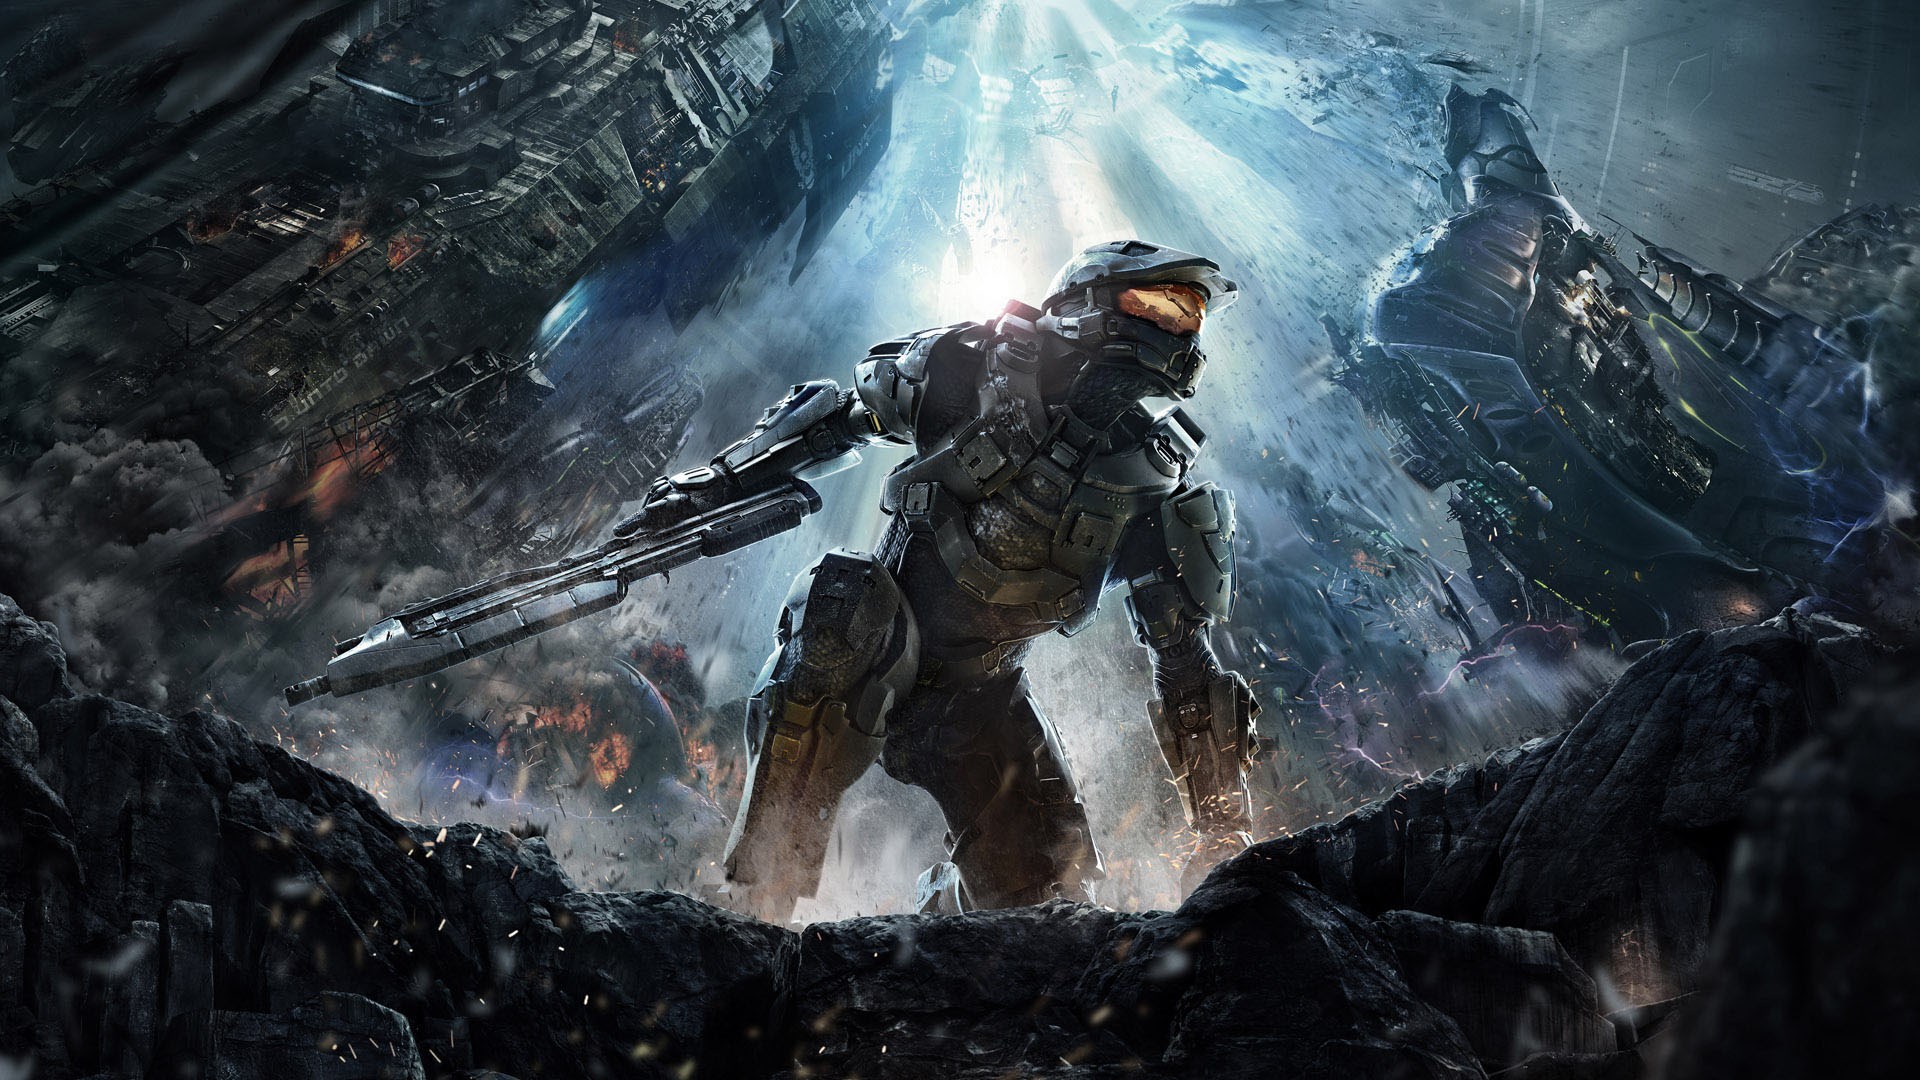 Halo 4 free. download full game pc